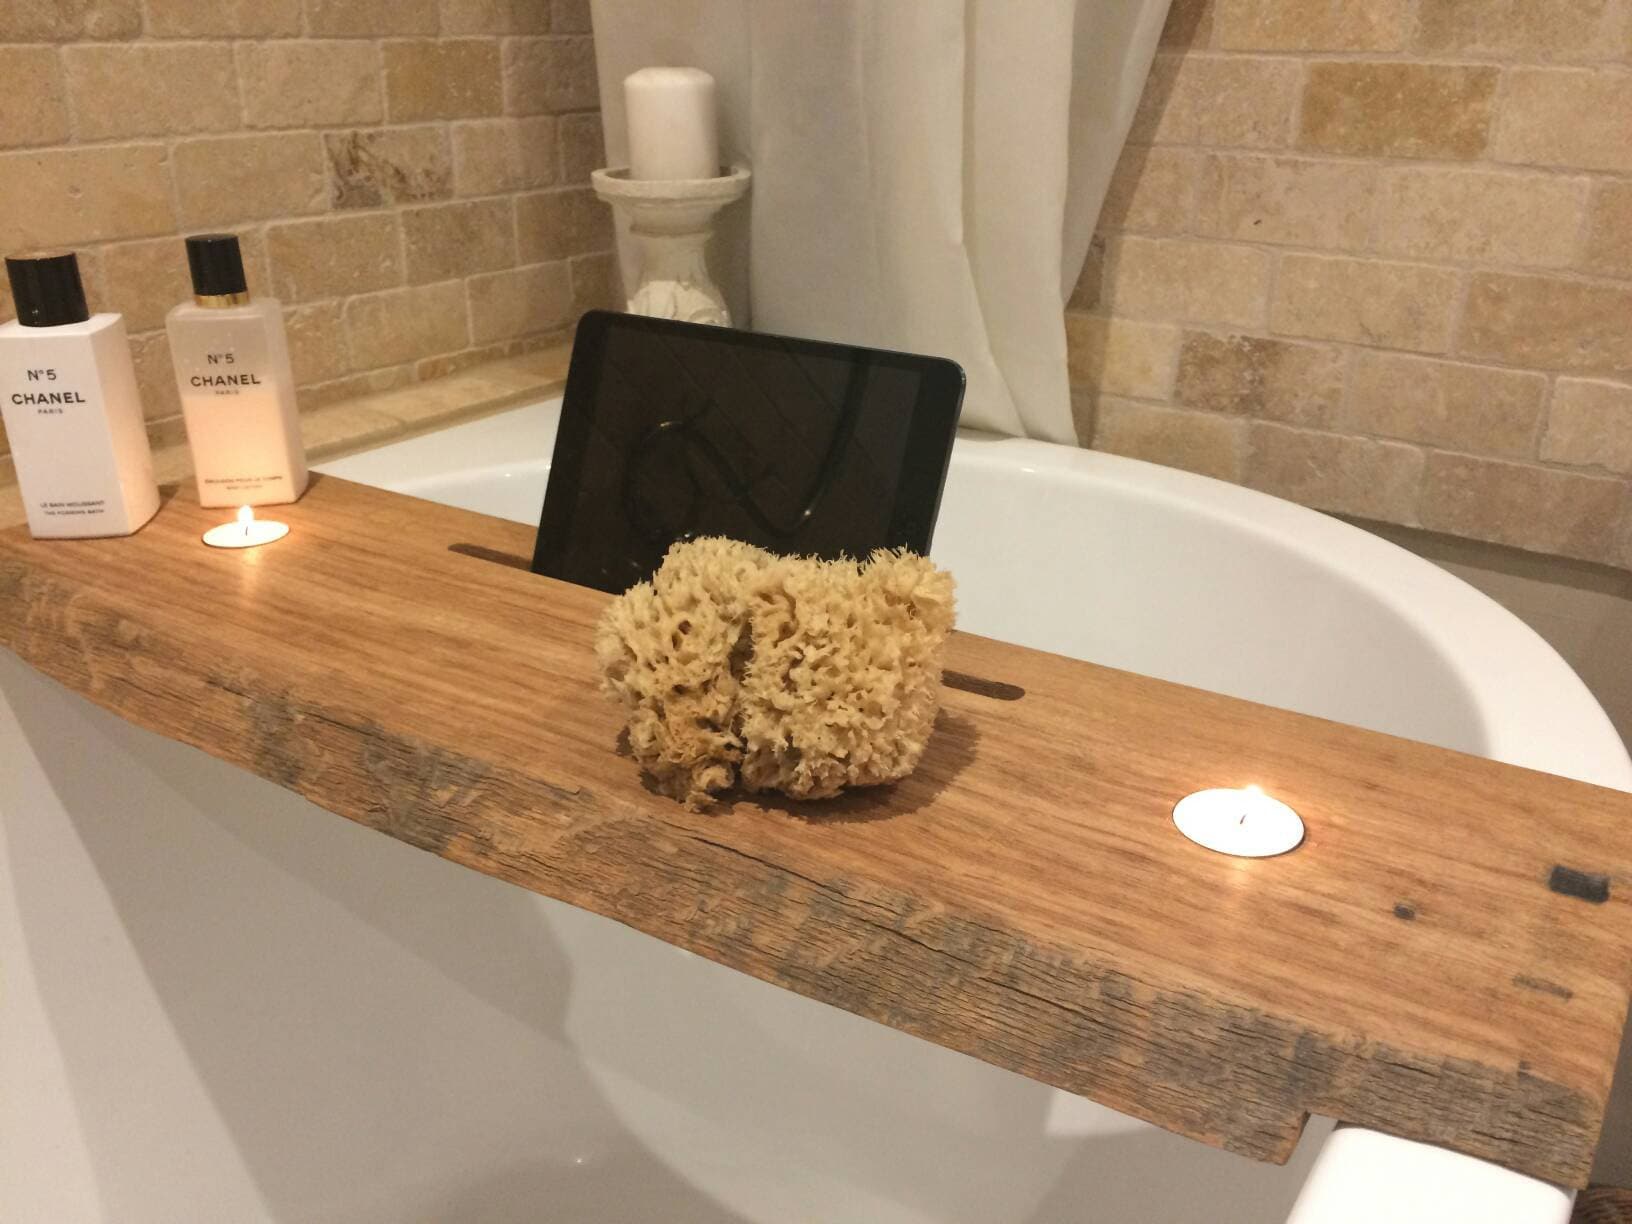 First project using oak. A one arm bath tray. : r/woodworking